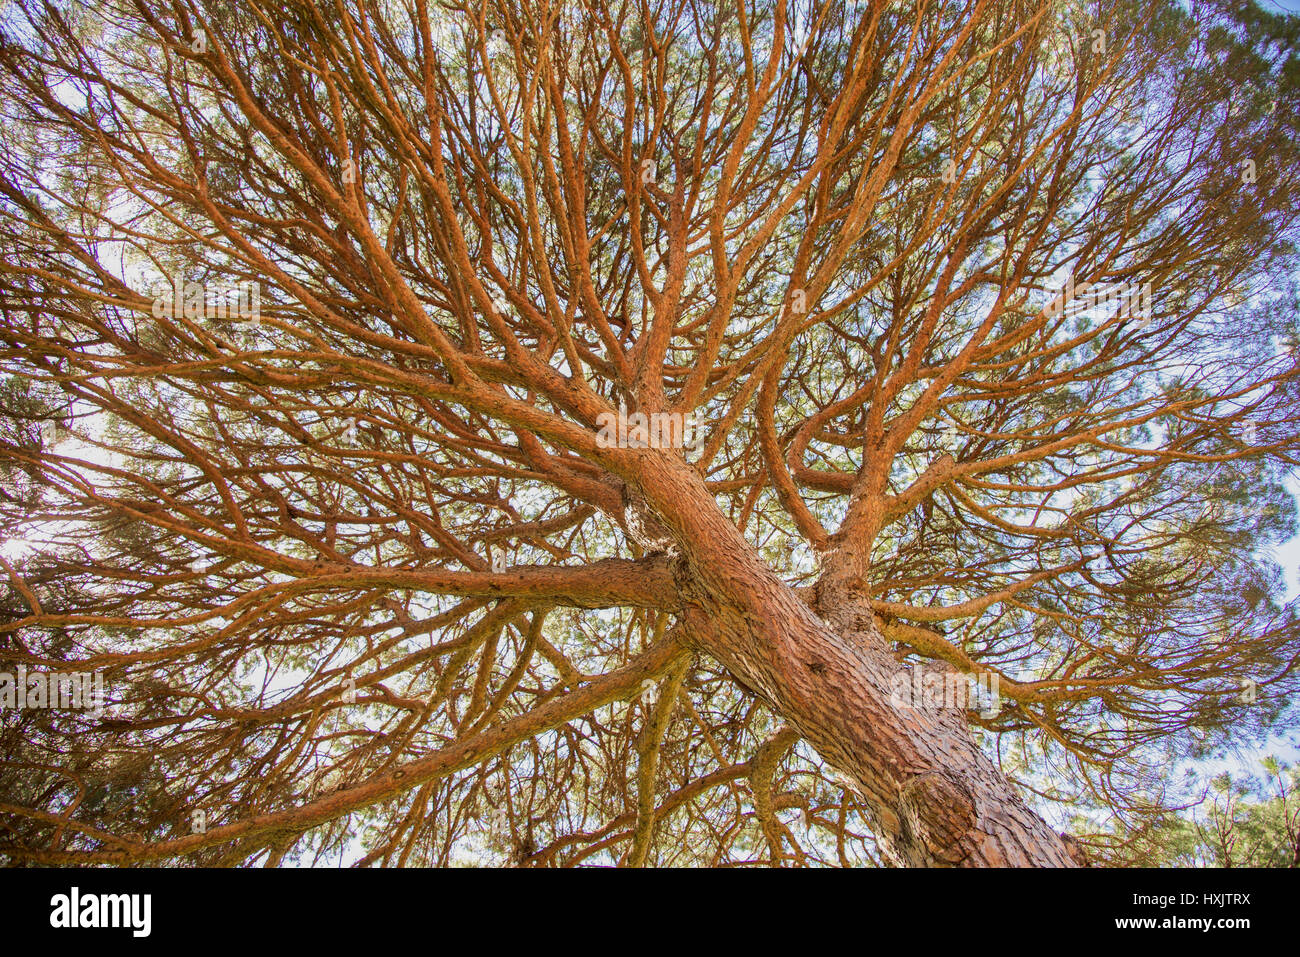 Low angle view of native tree at Bold Park reserve with densely packed branches under a blue sky in City Beach, Western Australia. Stock Photo